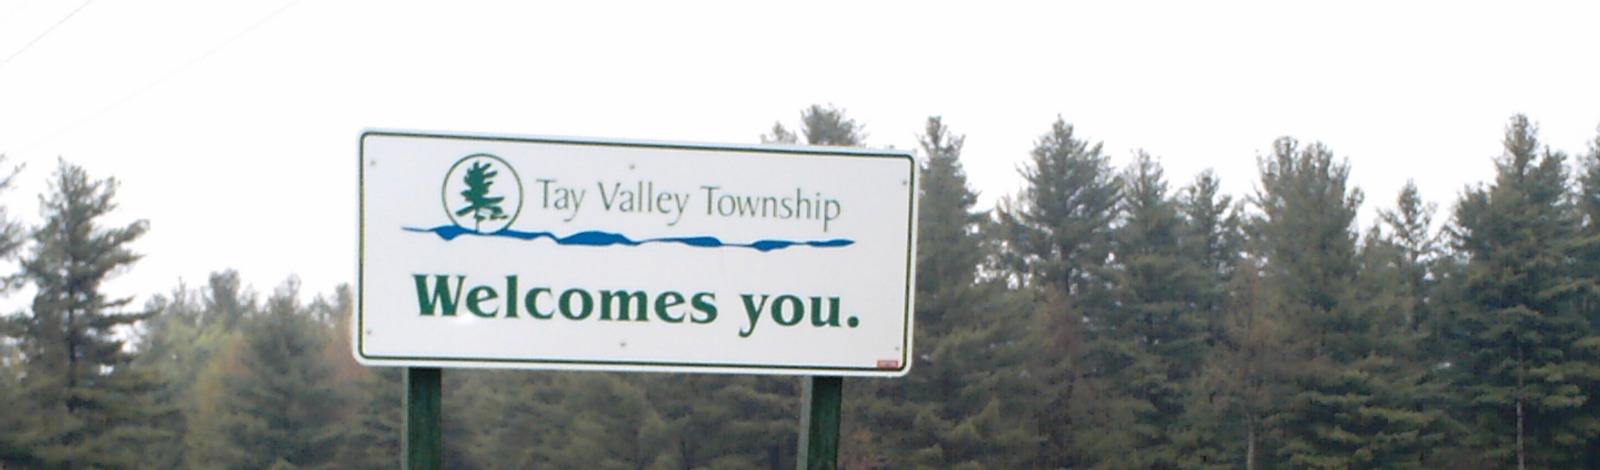 welcome sign 